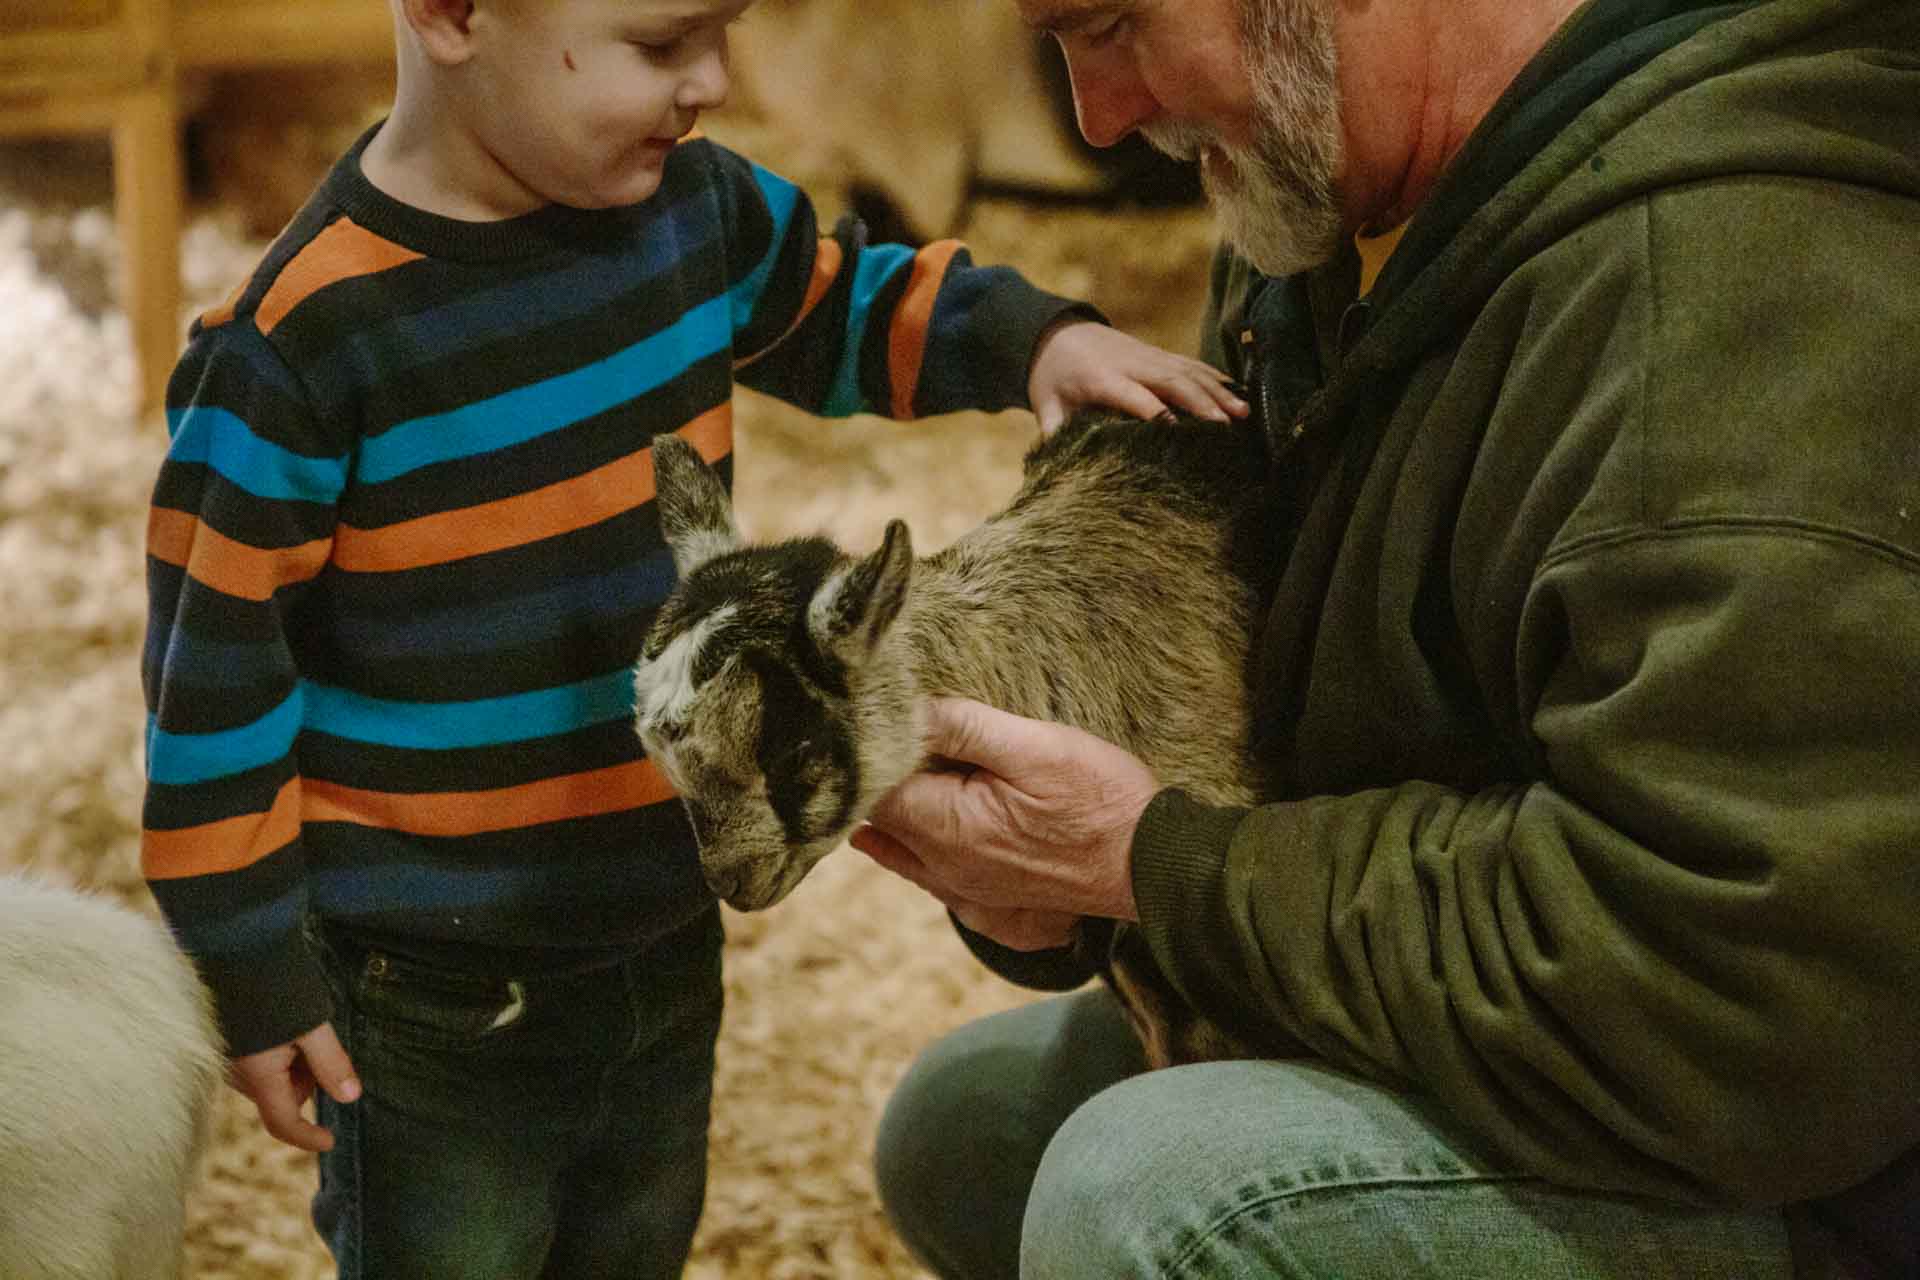 Petting Zoo - Pygmy Goat at Country Roads in Missouri